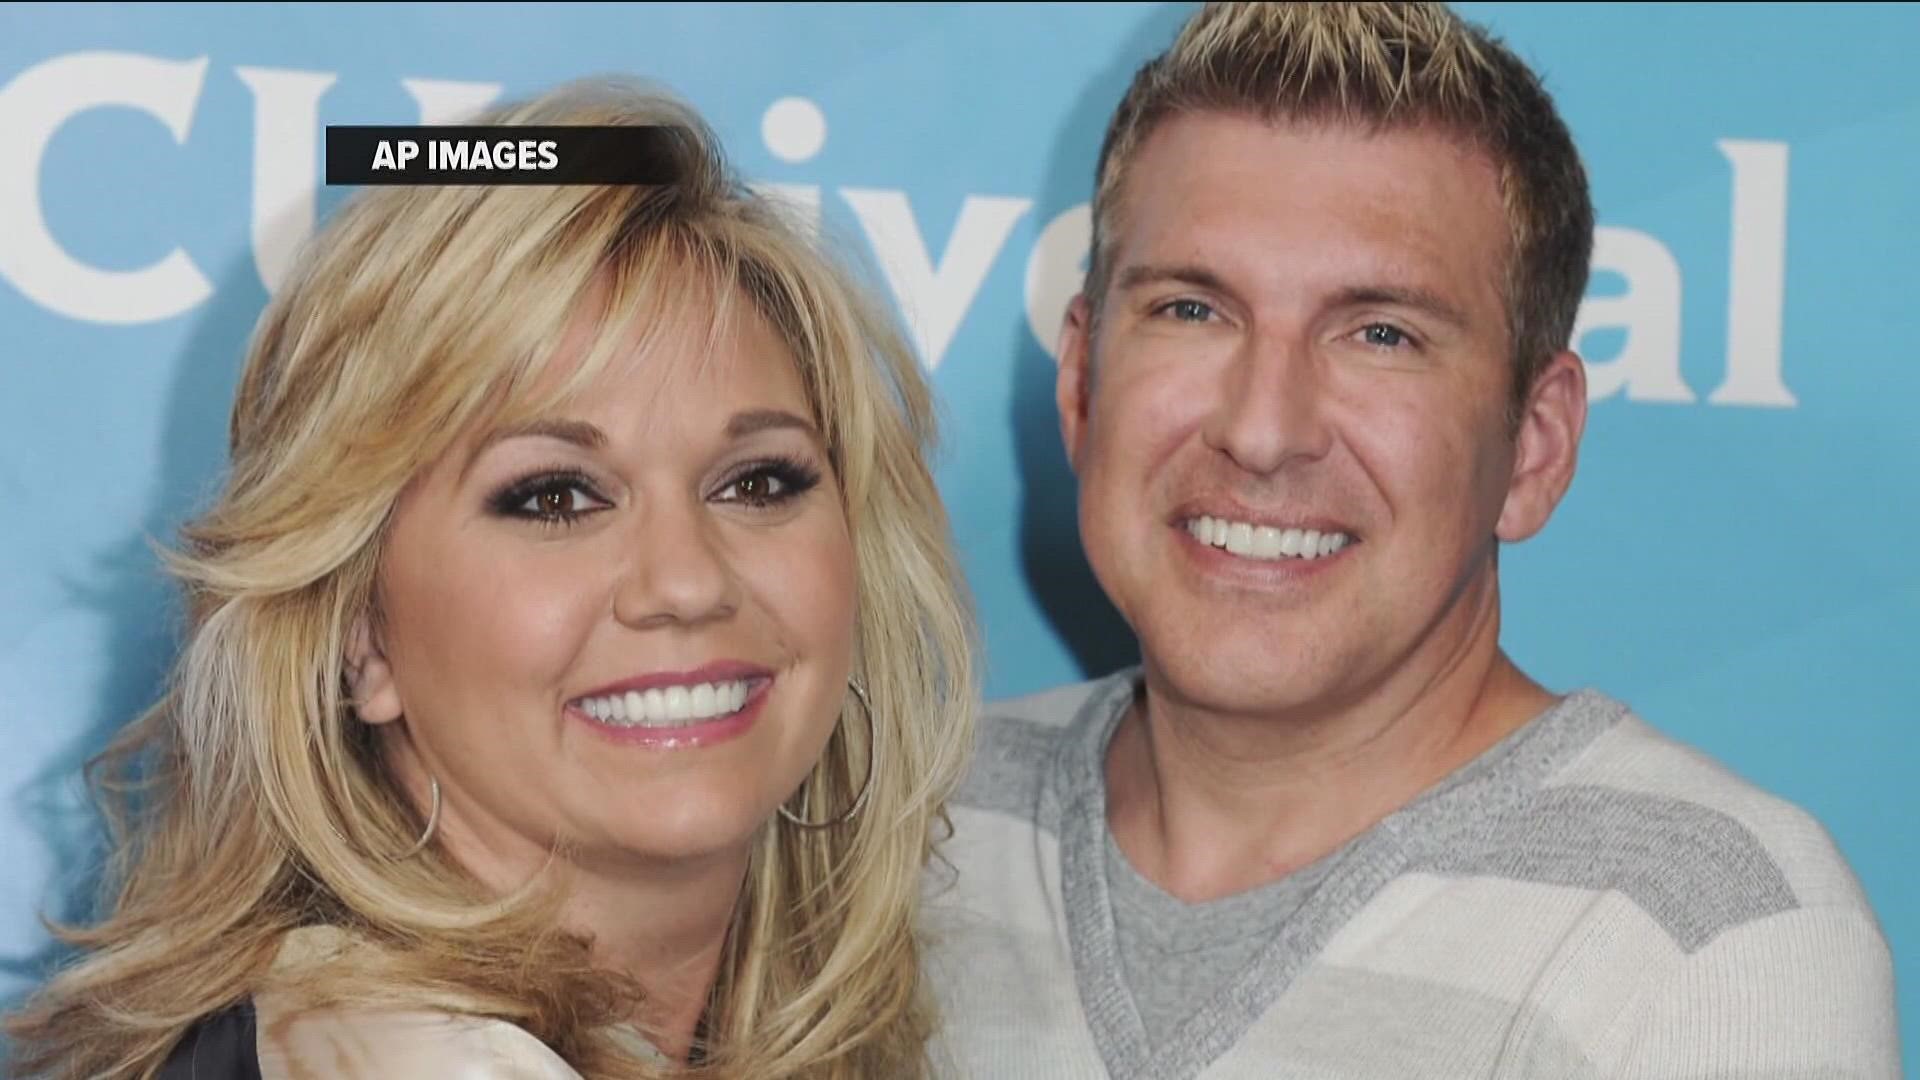 Reality TV stars Todd and Julie Chrisley are set to report to federal prison Tuesday beginning their sentences for bank fraud and tax evasion.